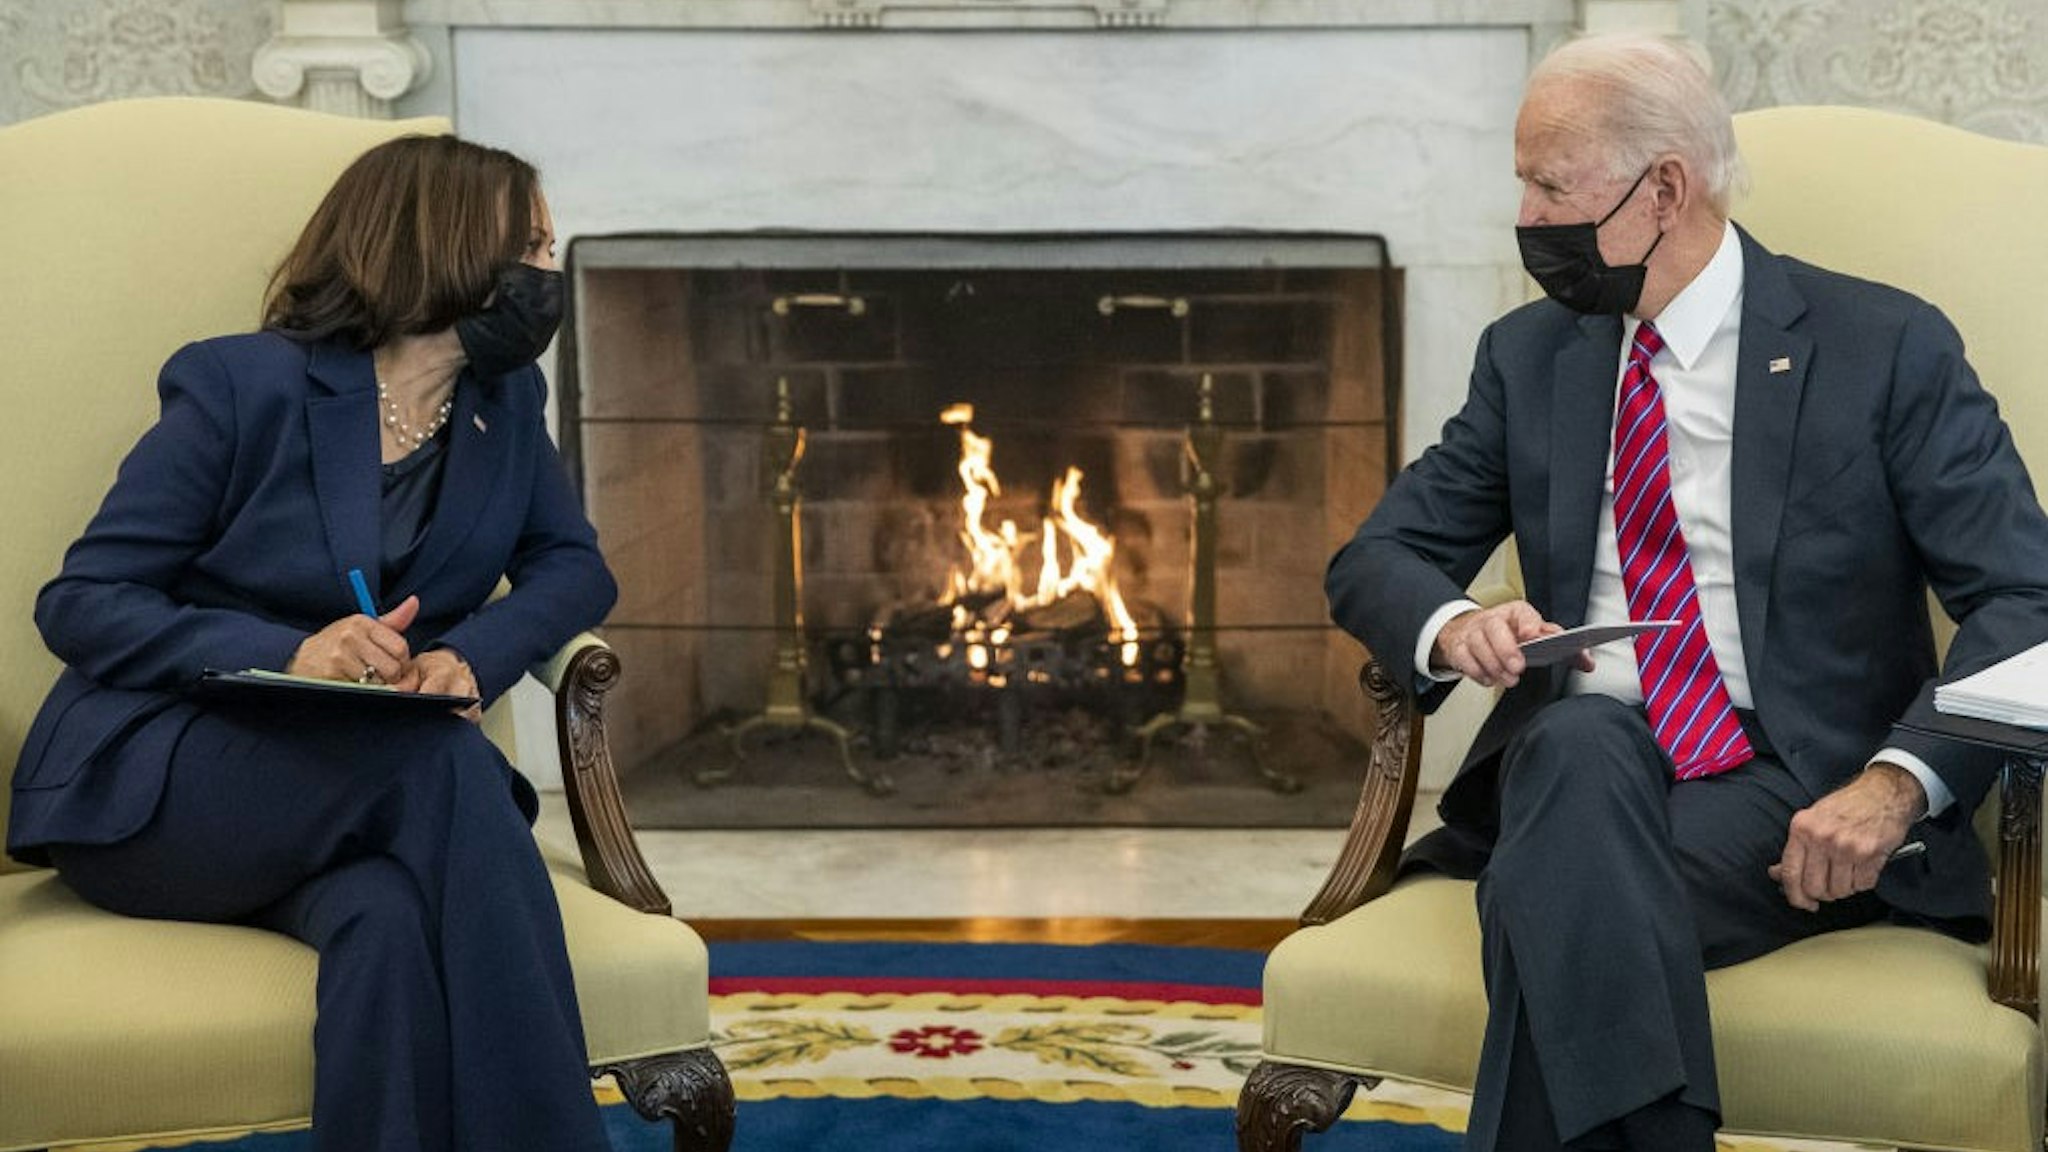 U.S. President Joe Biden speaks with U.S. Vice President Kamala Harris during a meeting with Janet Yellen, U.S. Treasury secretary, not pictured, in the Oval Office of the White House in Washington, D.C., U.S., on Friday, Jan. 29, 2021. Yellen said she'll try to "better understand" the financial risks of taking steps to combat climate change, while expressing support for Biden's decision to cancel the Keystone XL Pipeline.Photographer: